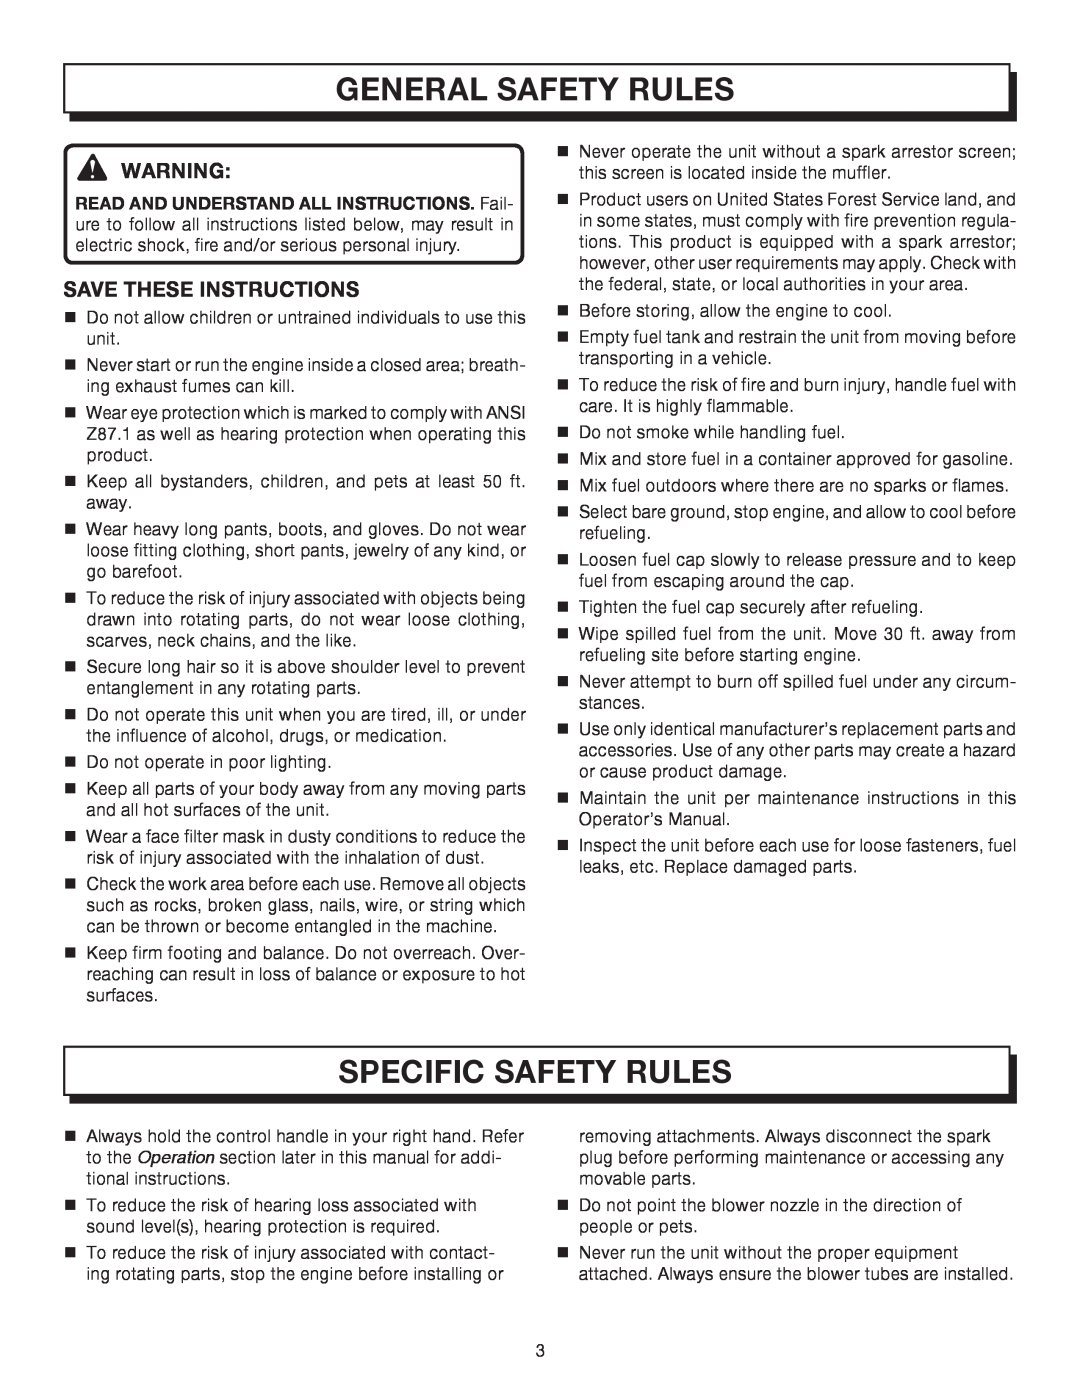 Homelite UT08572A manual General Safety Rules, Specific Safety Rules, Save These Instructions 